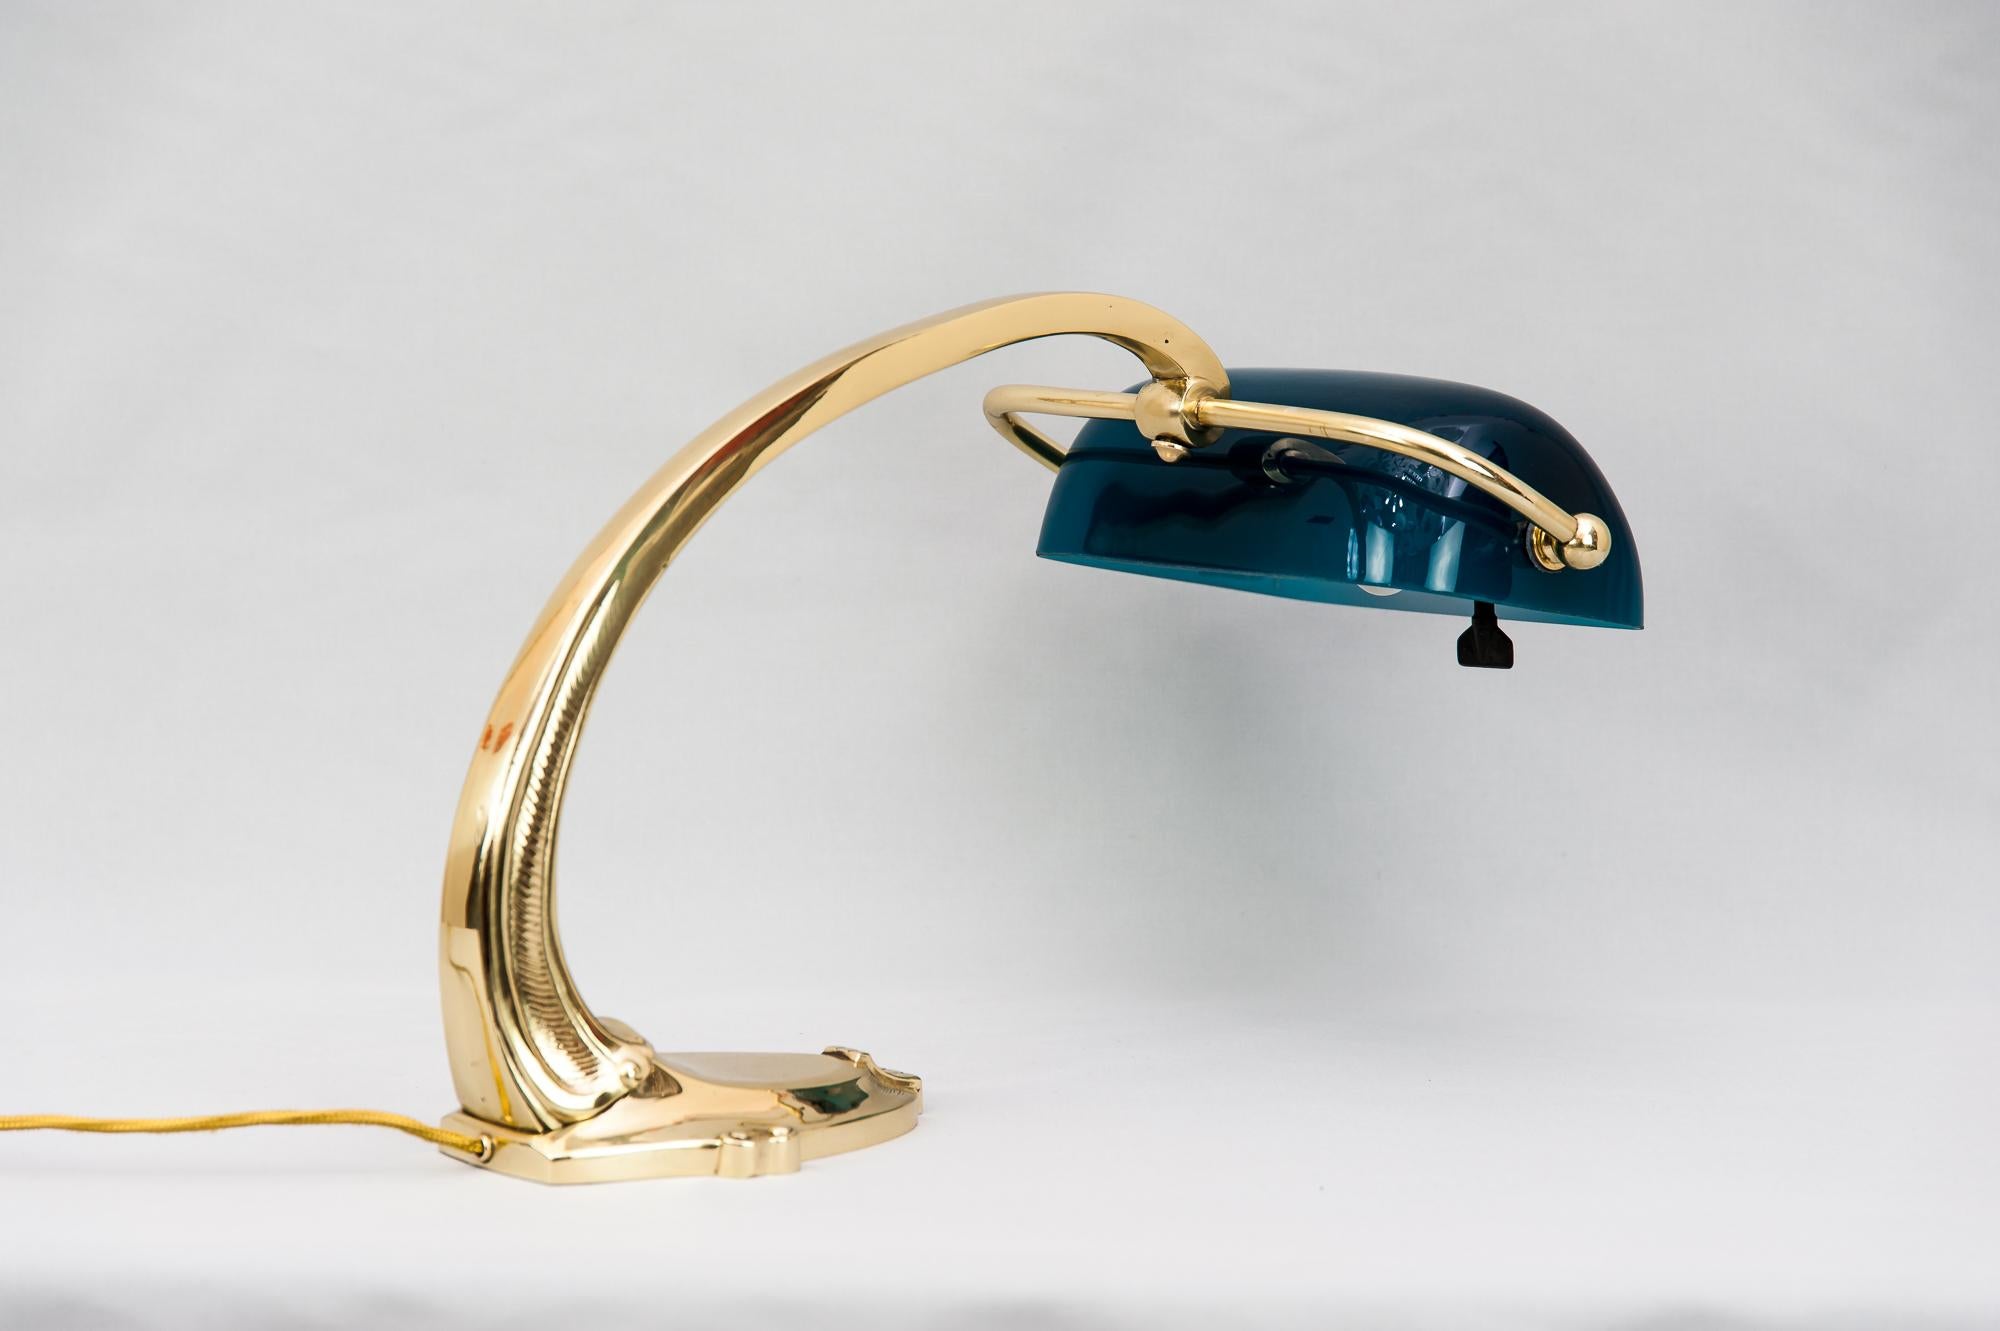 Lacquered Art Deco Table Lamp or Piano Lamp, circa 1920s